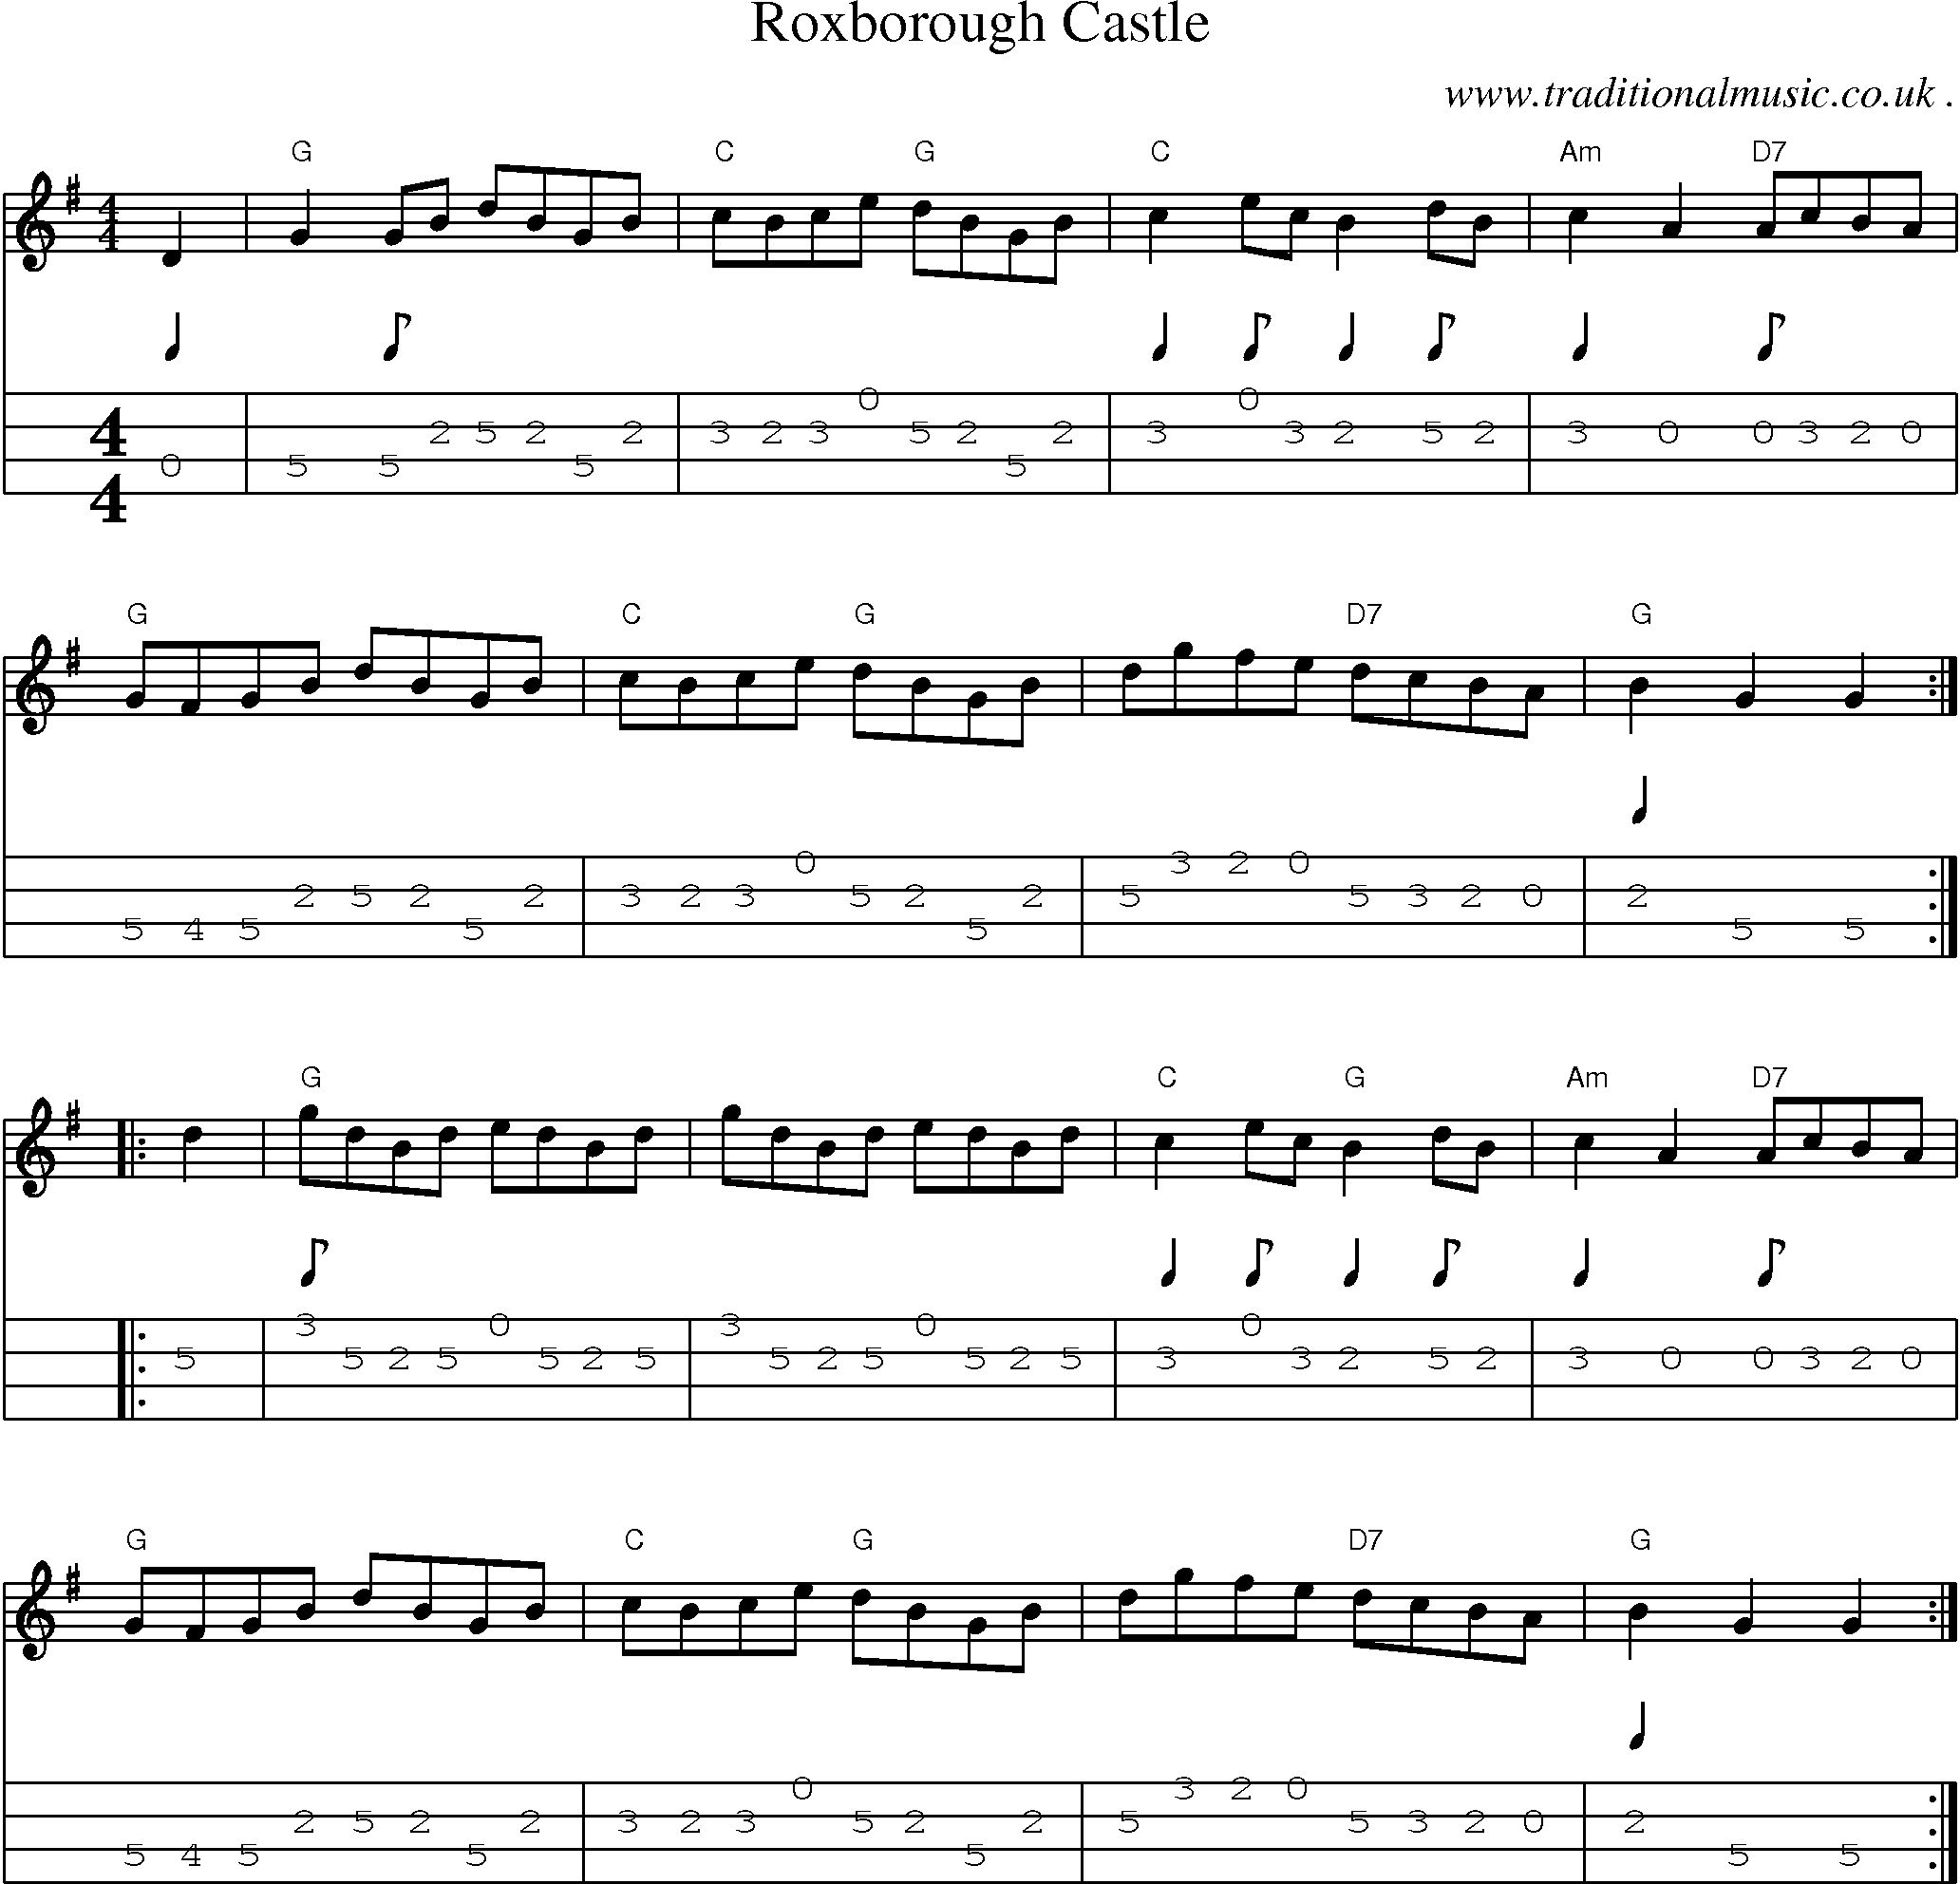 Music Score and Guitar Tabs for Roxborough Castle